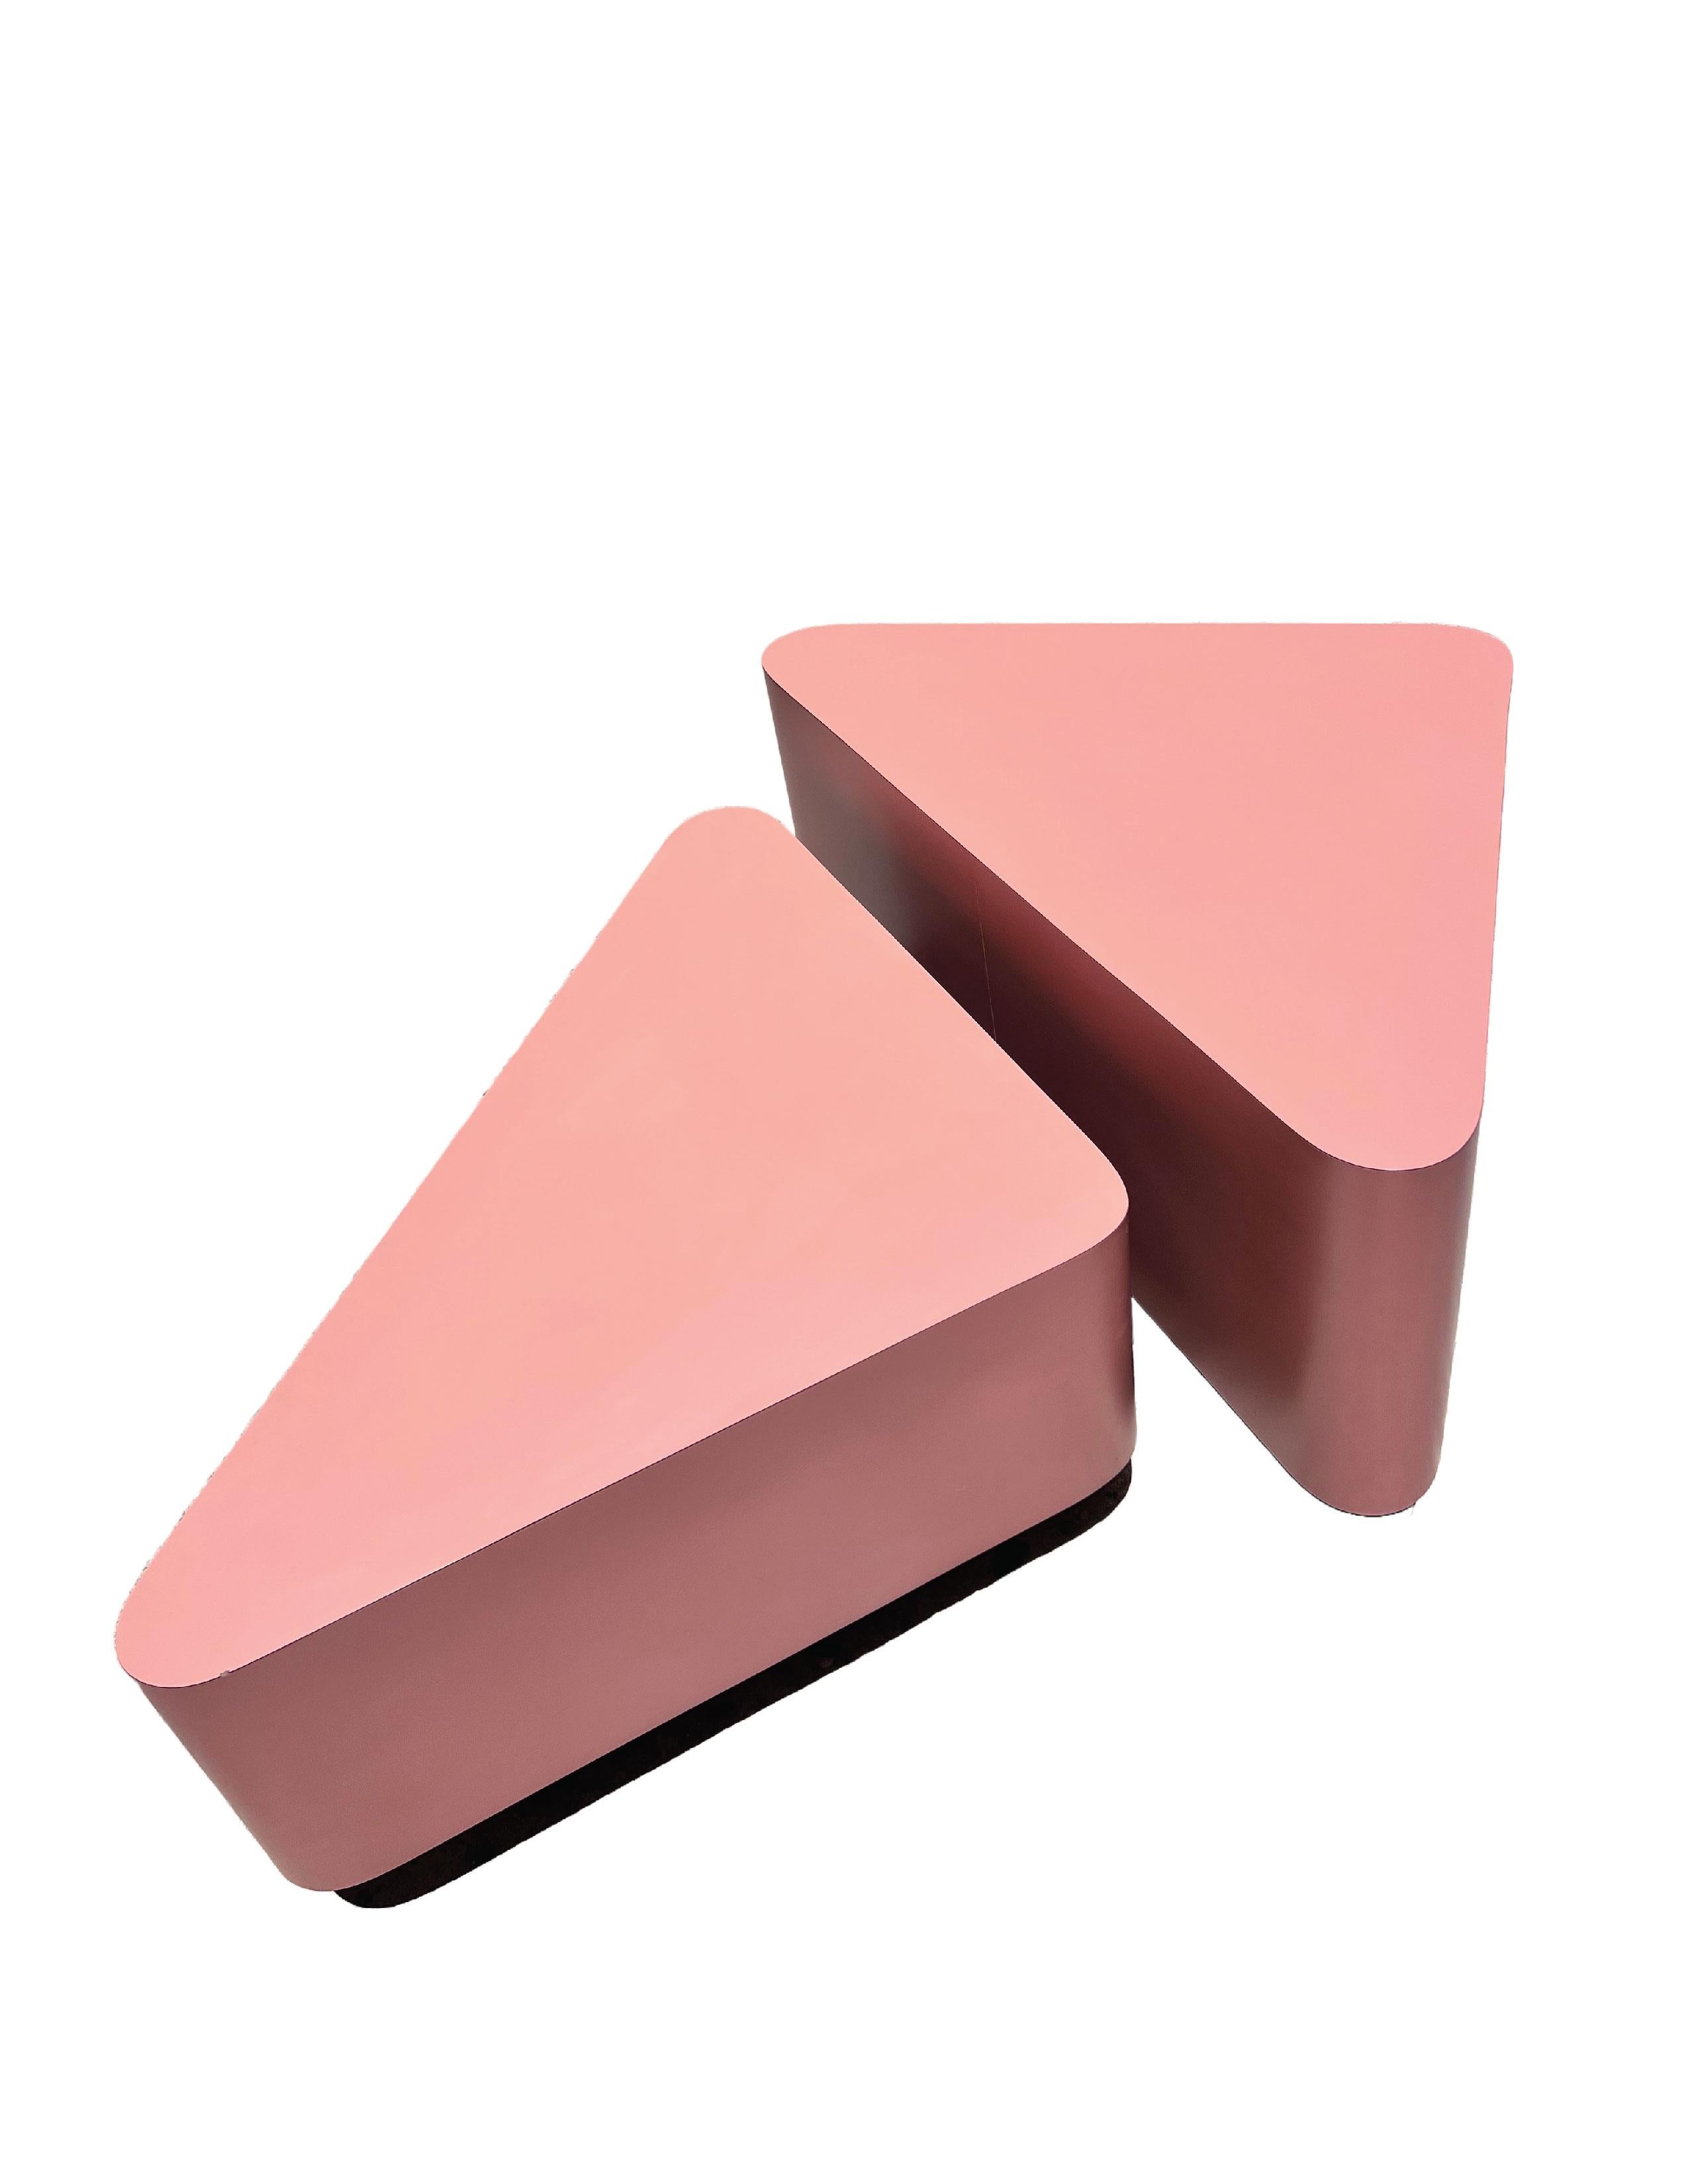 American Triangular Postmodern Coffee Table or Side Tables, Mauve or Pink Laminate, Large